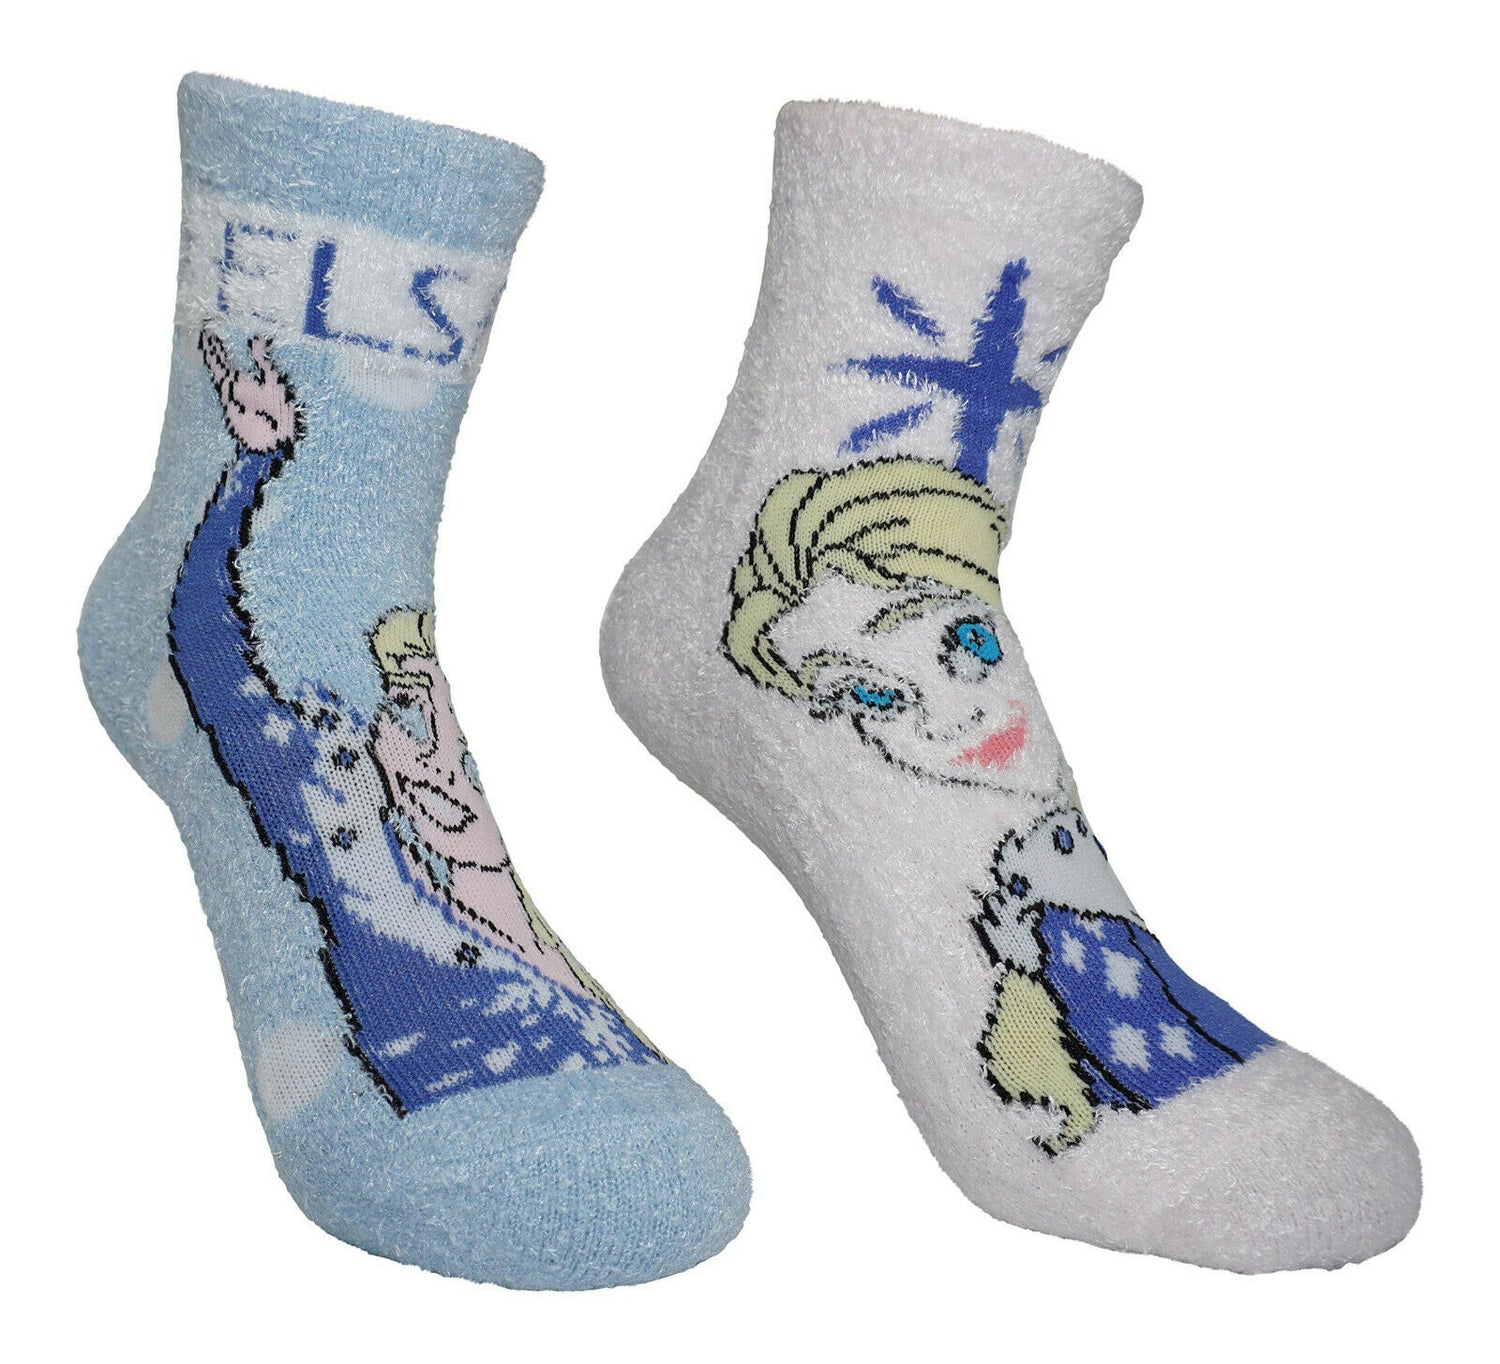 Children's Licensed Frozen Fluffy 2 Pair Pack. You Get A Blue Pair And A Pink Pair. They Have Non Slip Hearts On The Soles